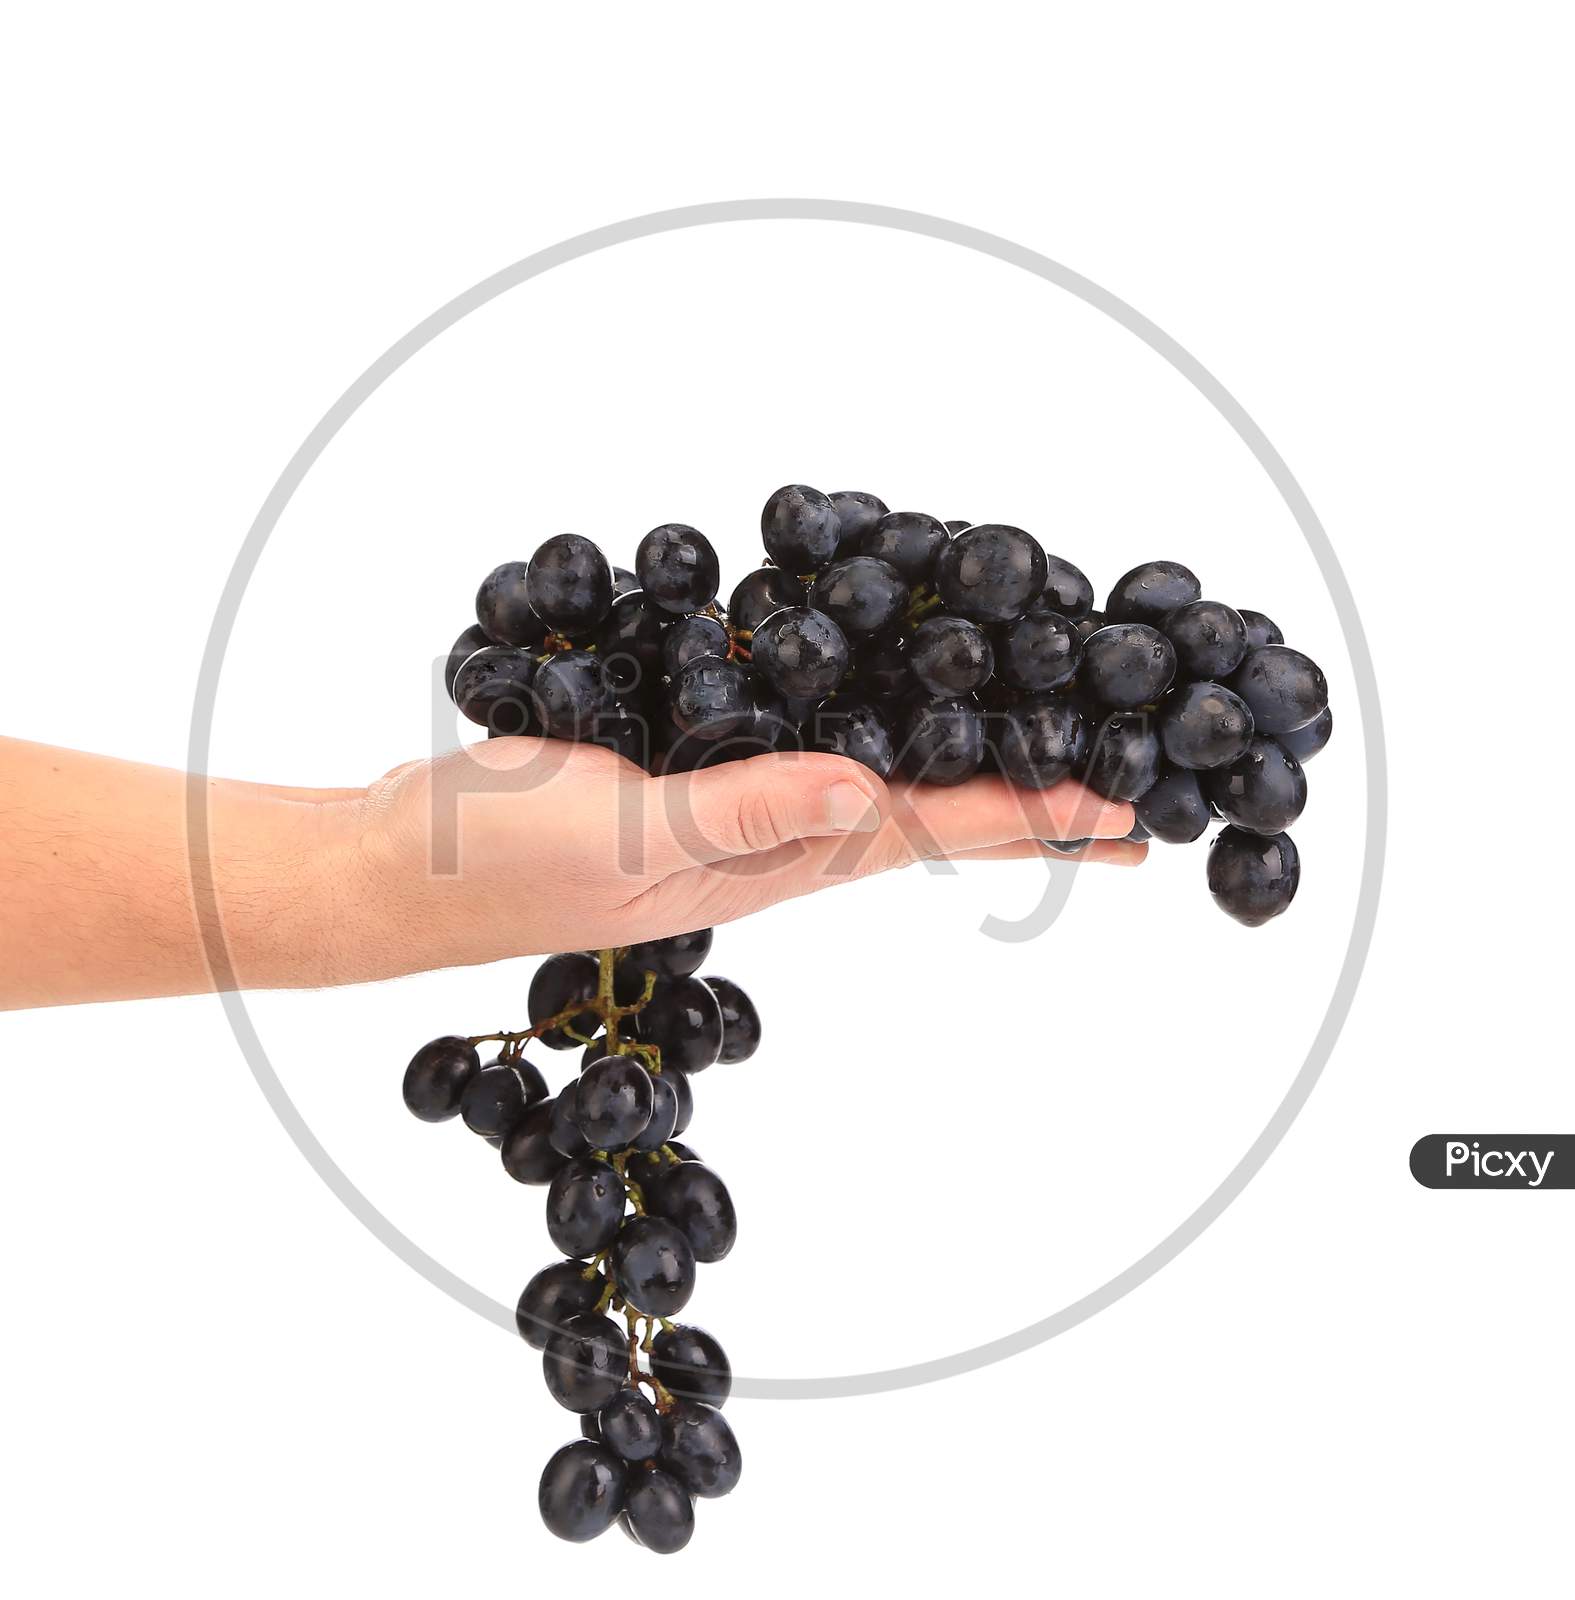 Branch Of Black Ripe Grapes On Hand. Isolated On A White Background.